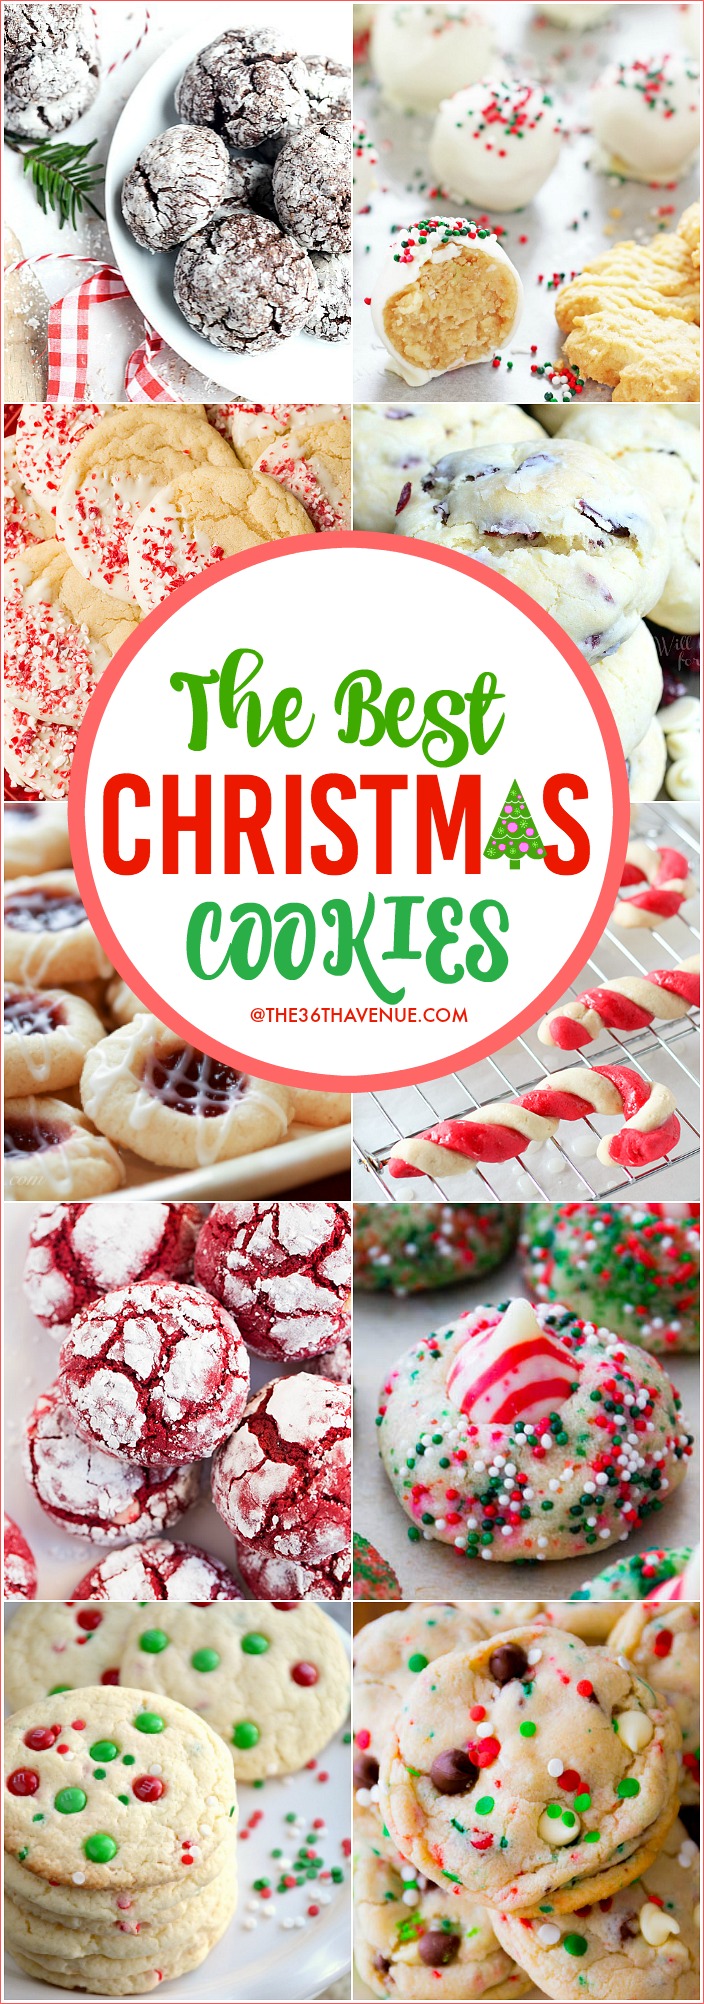 Christmas Cookies - These Christmas Cookie Recipes are delicious and easy to make. Perfect for Christmas desserts and edible neighbor Christmas gifts!